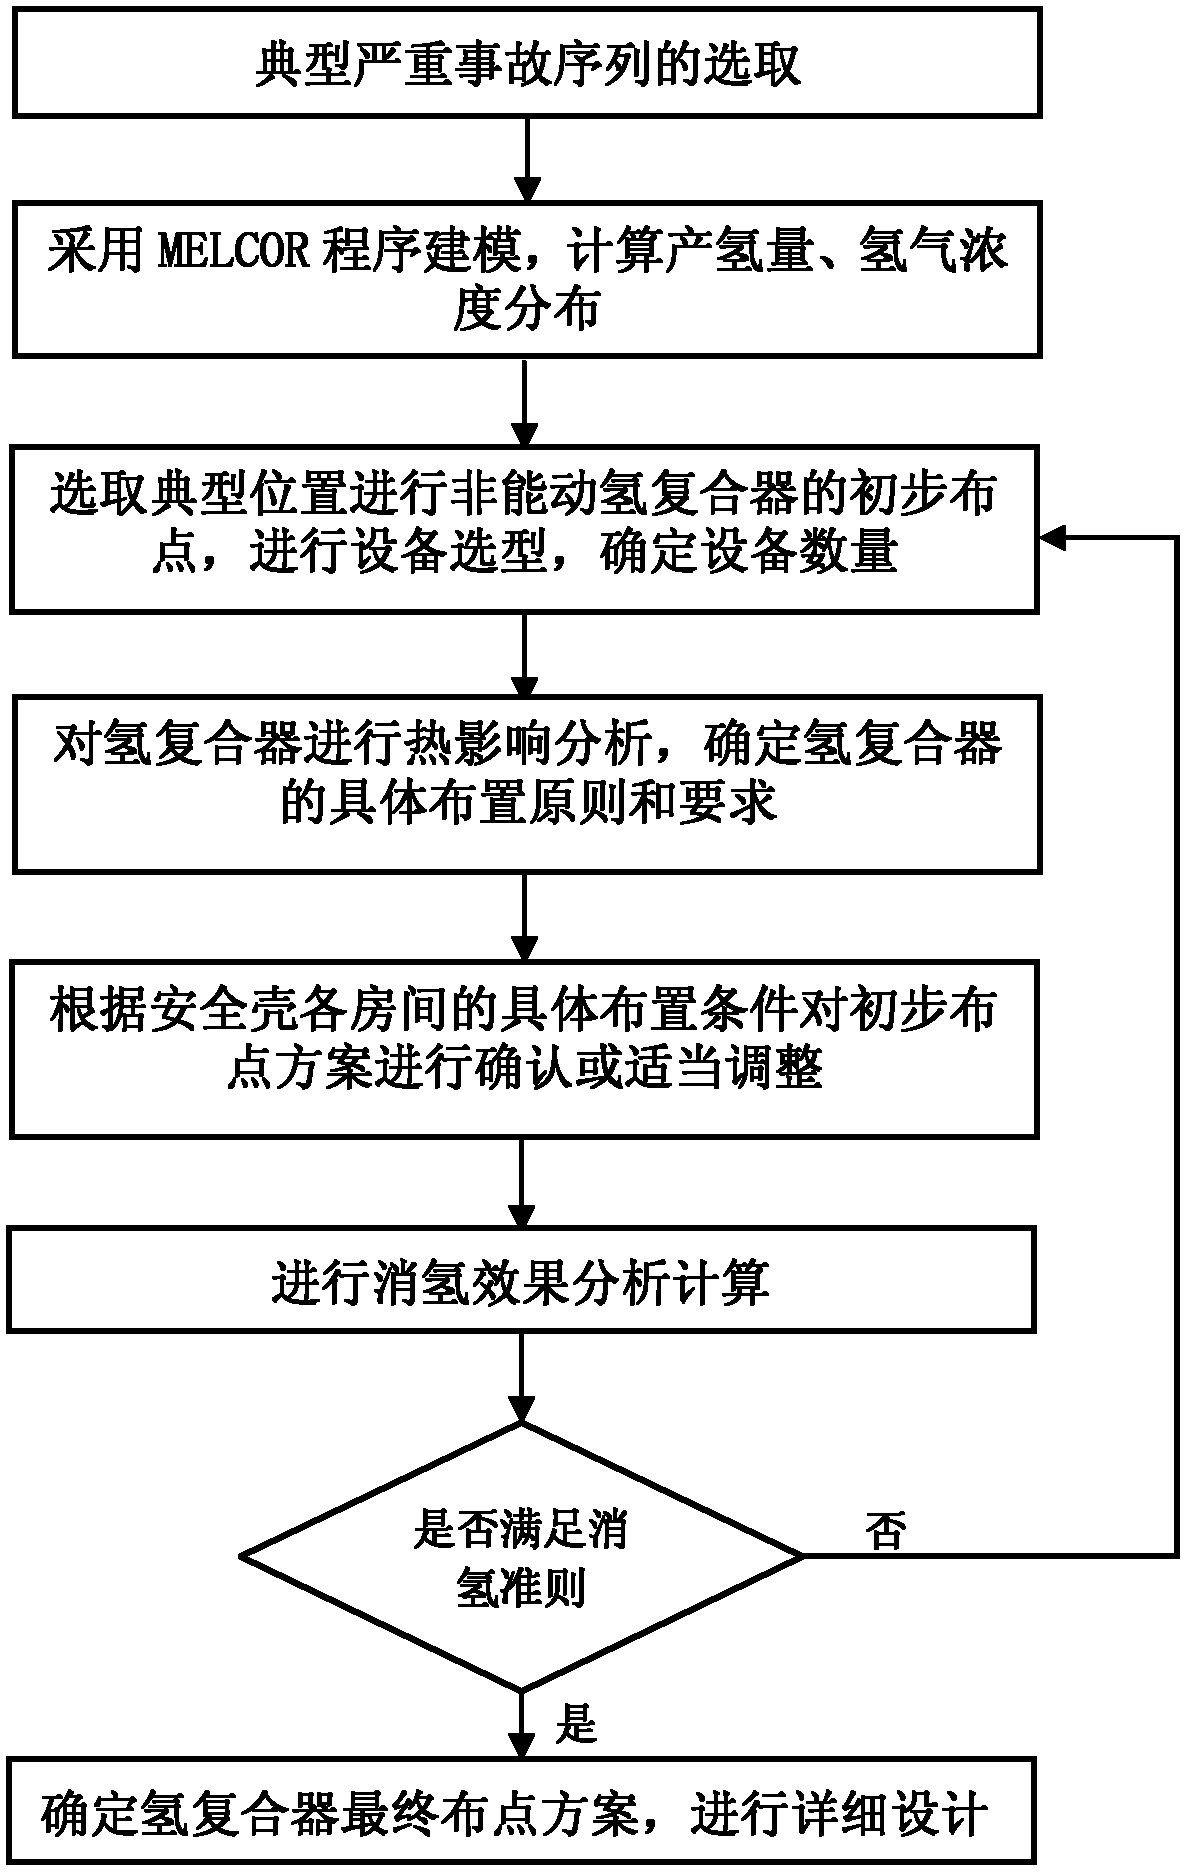 Design method for dehydrogenating containment of nuclear power station under serious accident